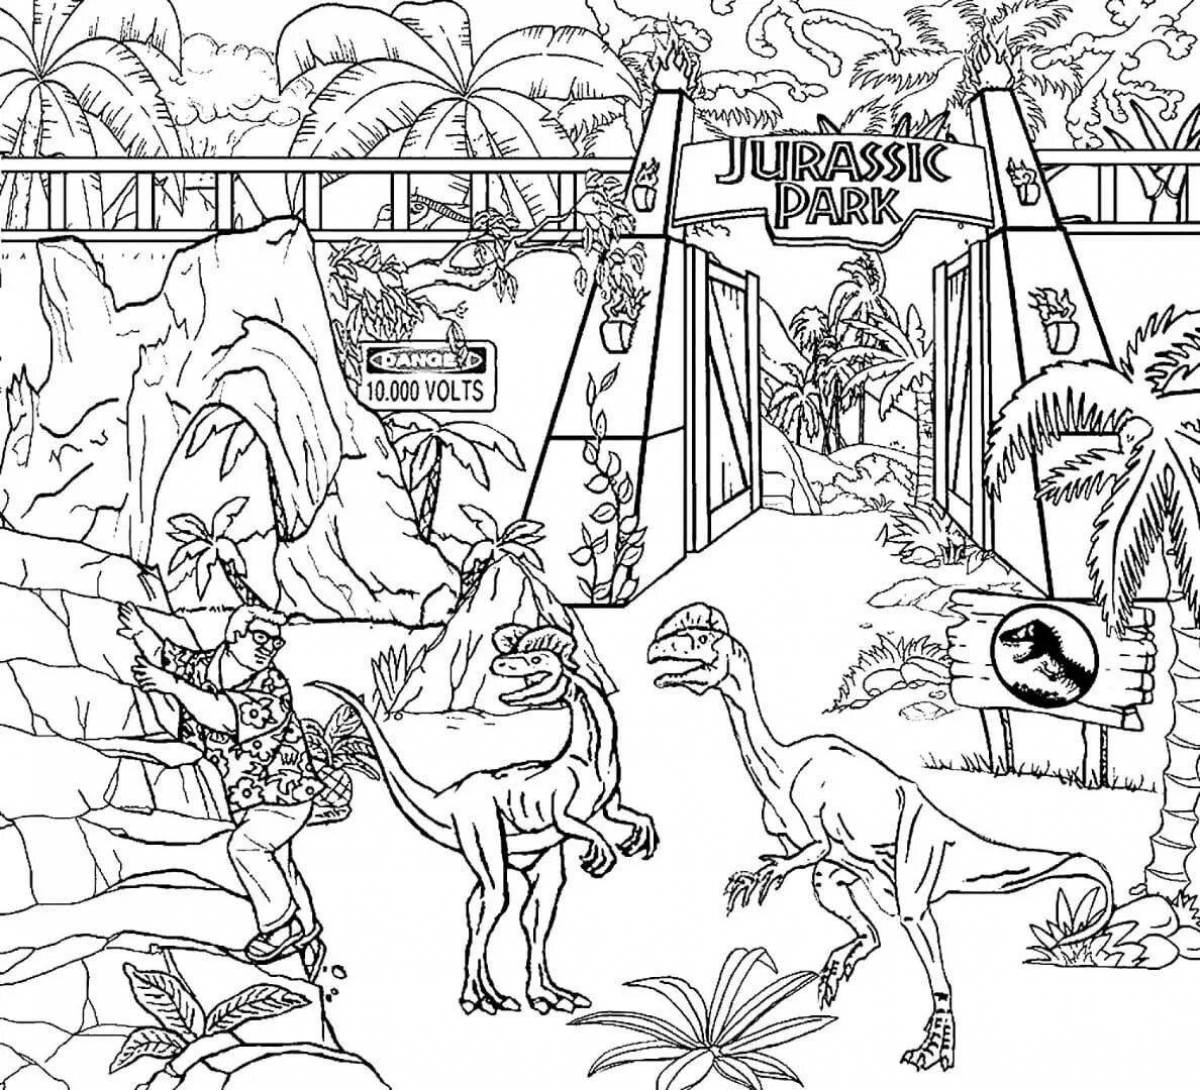 Magnificent Jurassic World coloring book